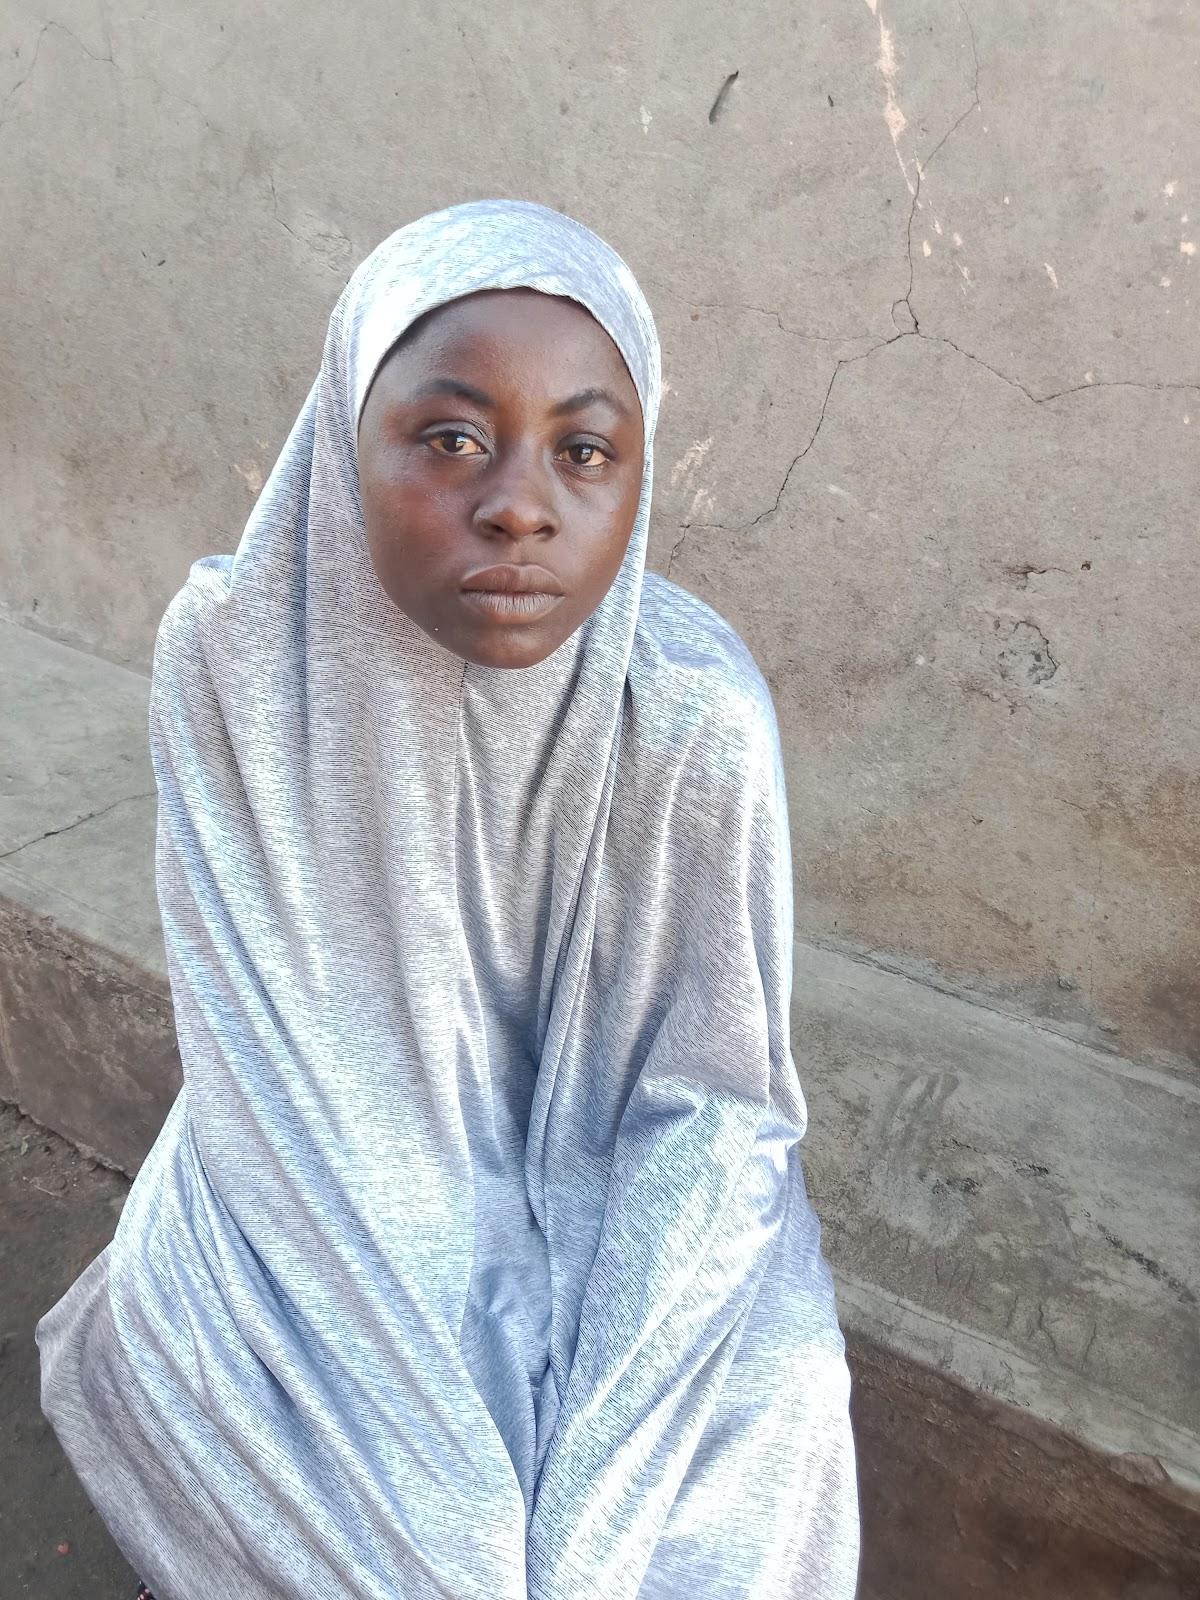 Divine Deceit: Story of Popular Cleric Hassan Patigi who Tortures People Seeking Spiritual Help, Strips Women Naked, Extorts Them for Money, while Nigeria Govt Turns a Blind Eye (I)